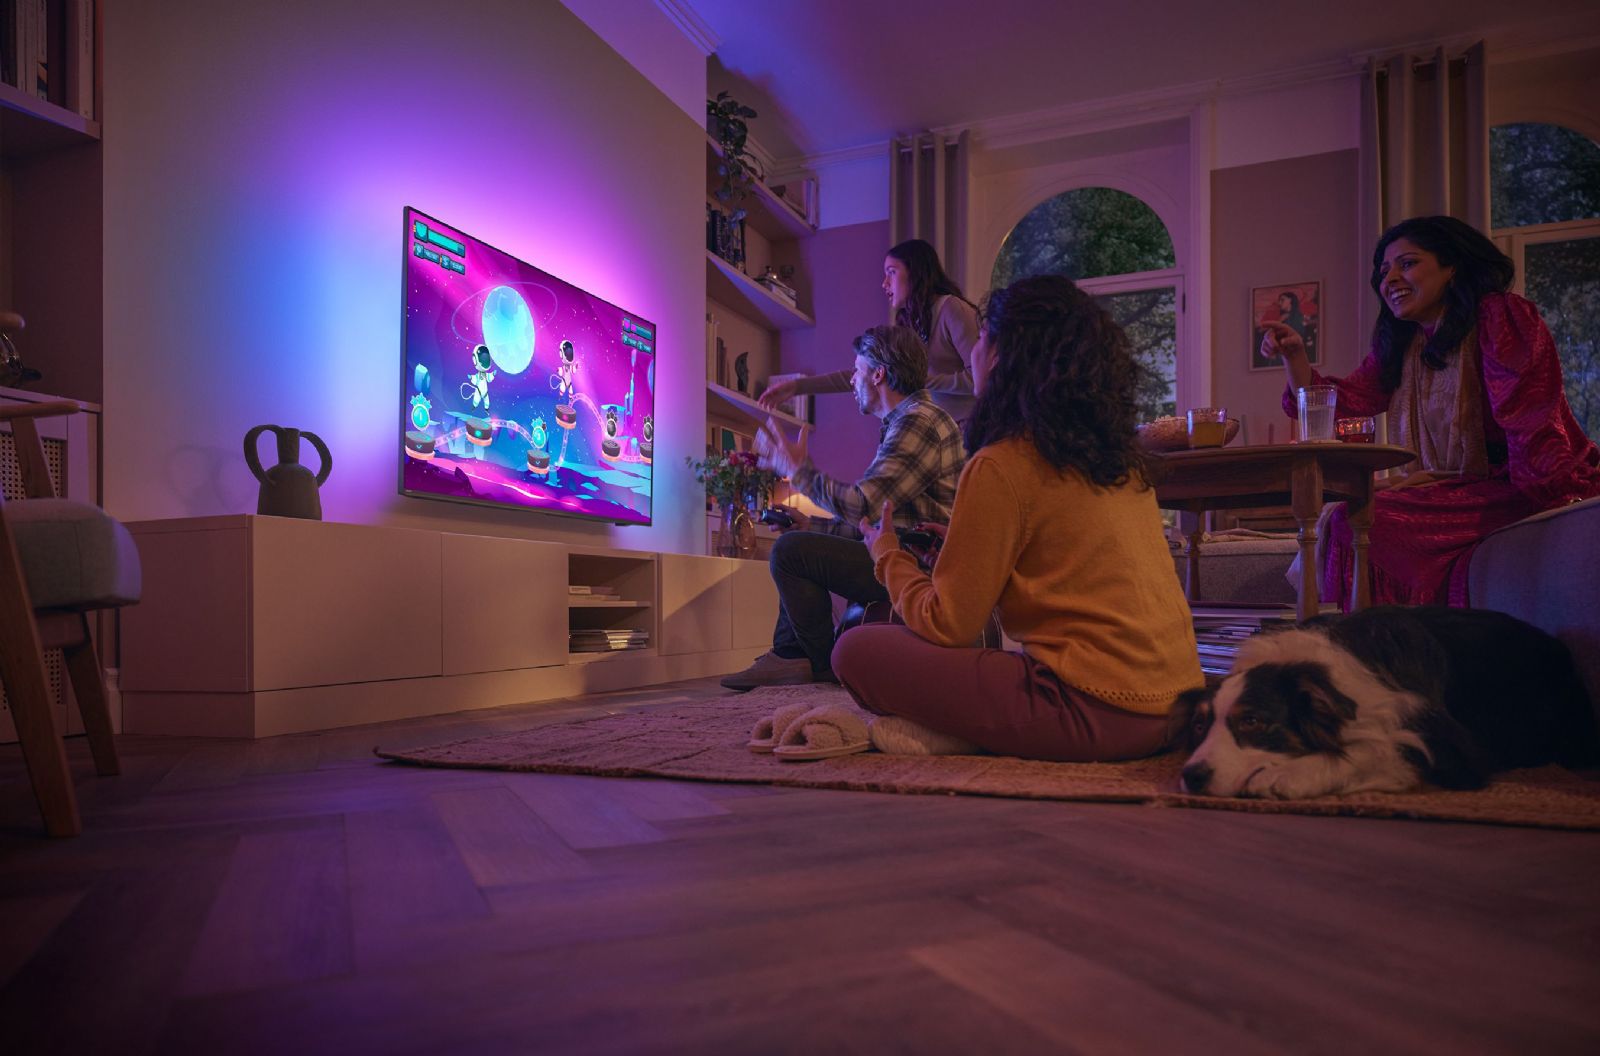 TV-apparater Philips 85PUS8808 The One Ambilight 4K LED-TV